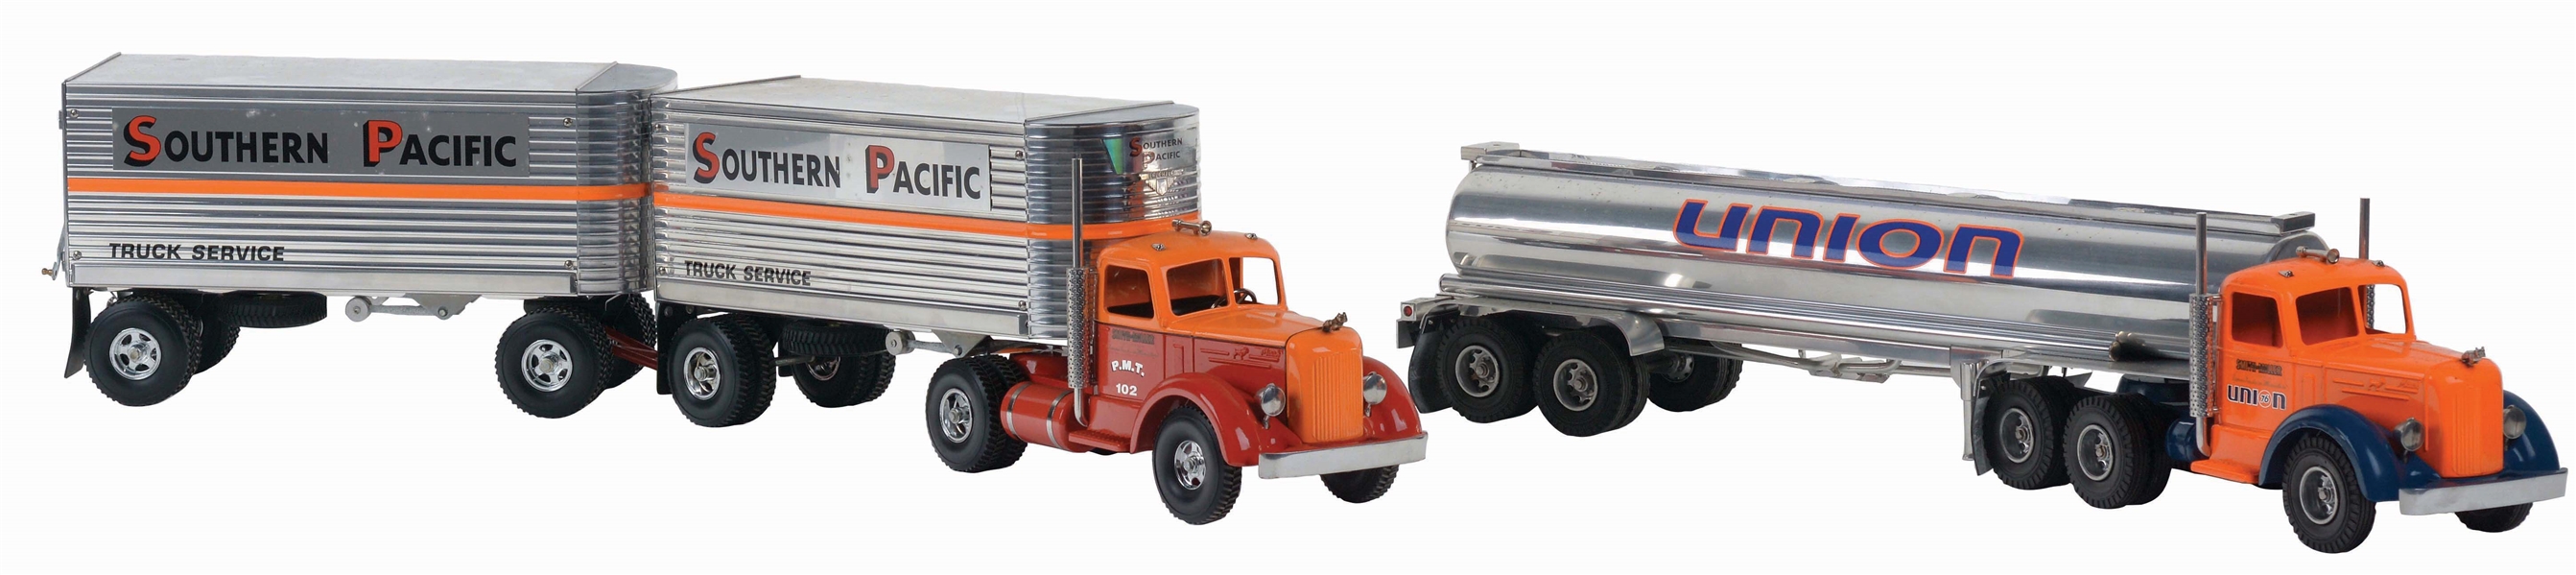 LOT OF 2 CONTEMPORARY FRED THOMPSON UNION-76 TANKER AND SOUTHERN PACIFIC TRUCKS.